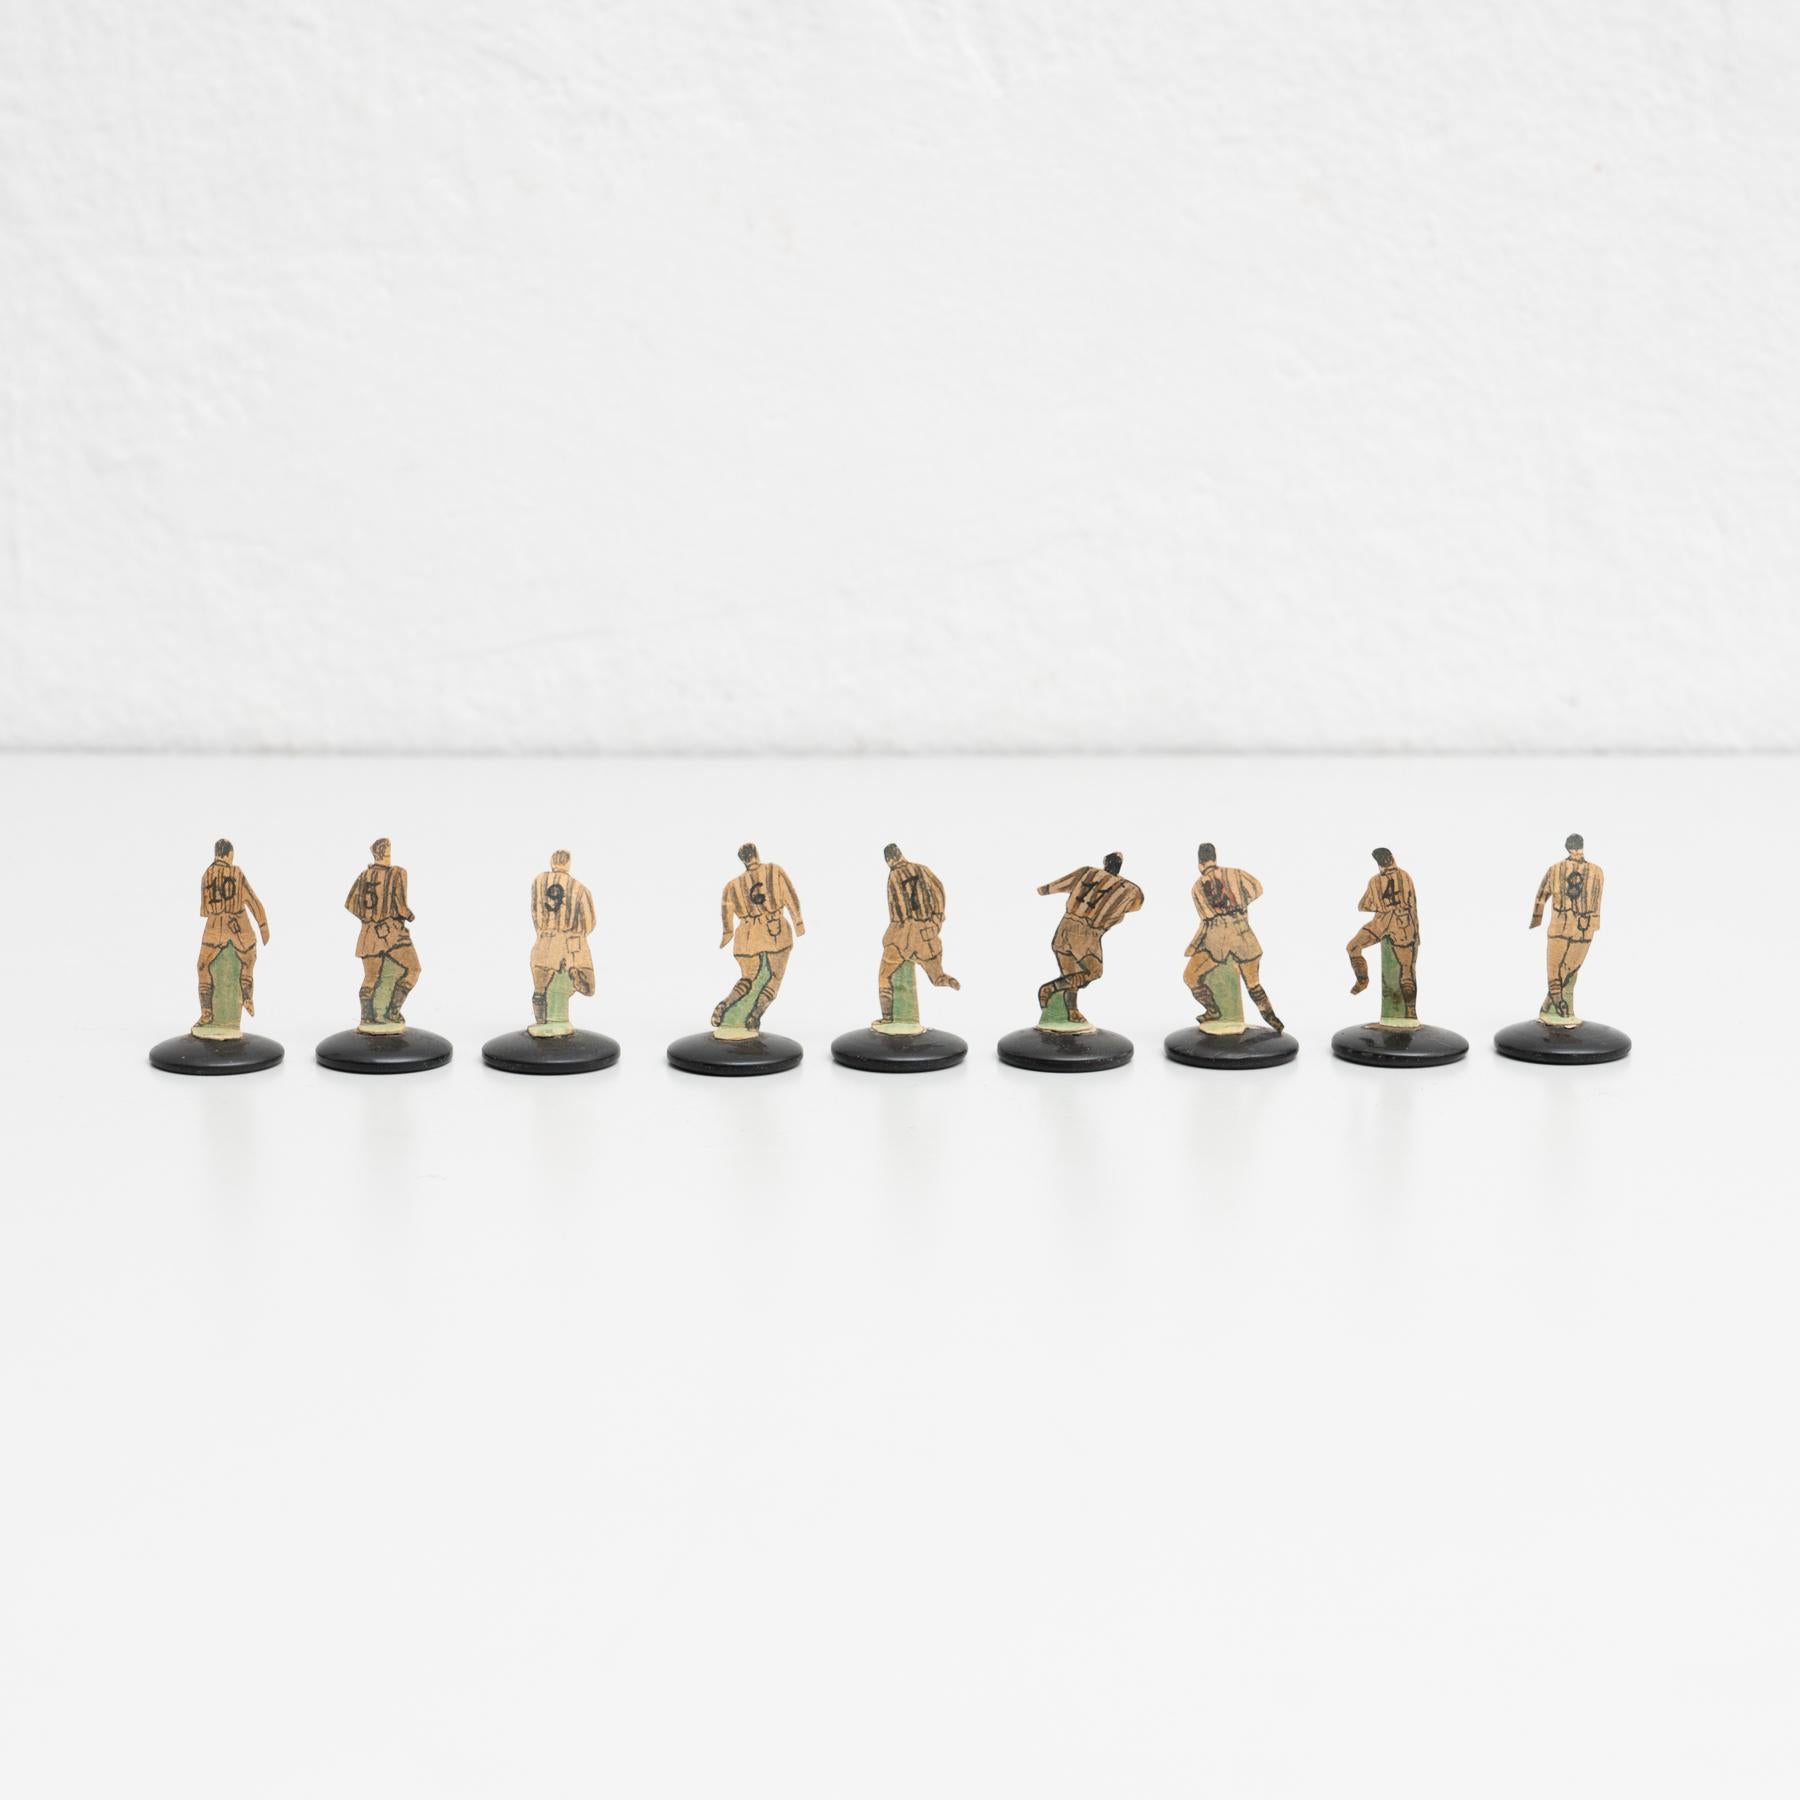 Mid-Century Modern Set of 9 Traditional Antique Button Soccer Game Figures, circa 1950 For Sale